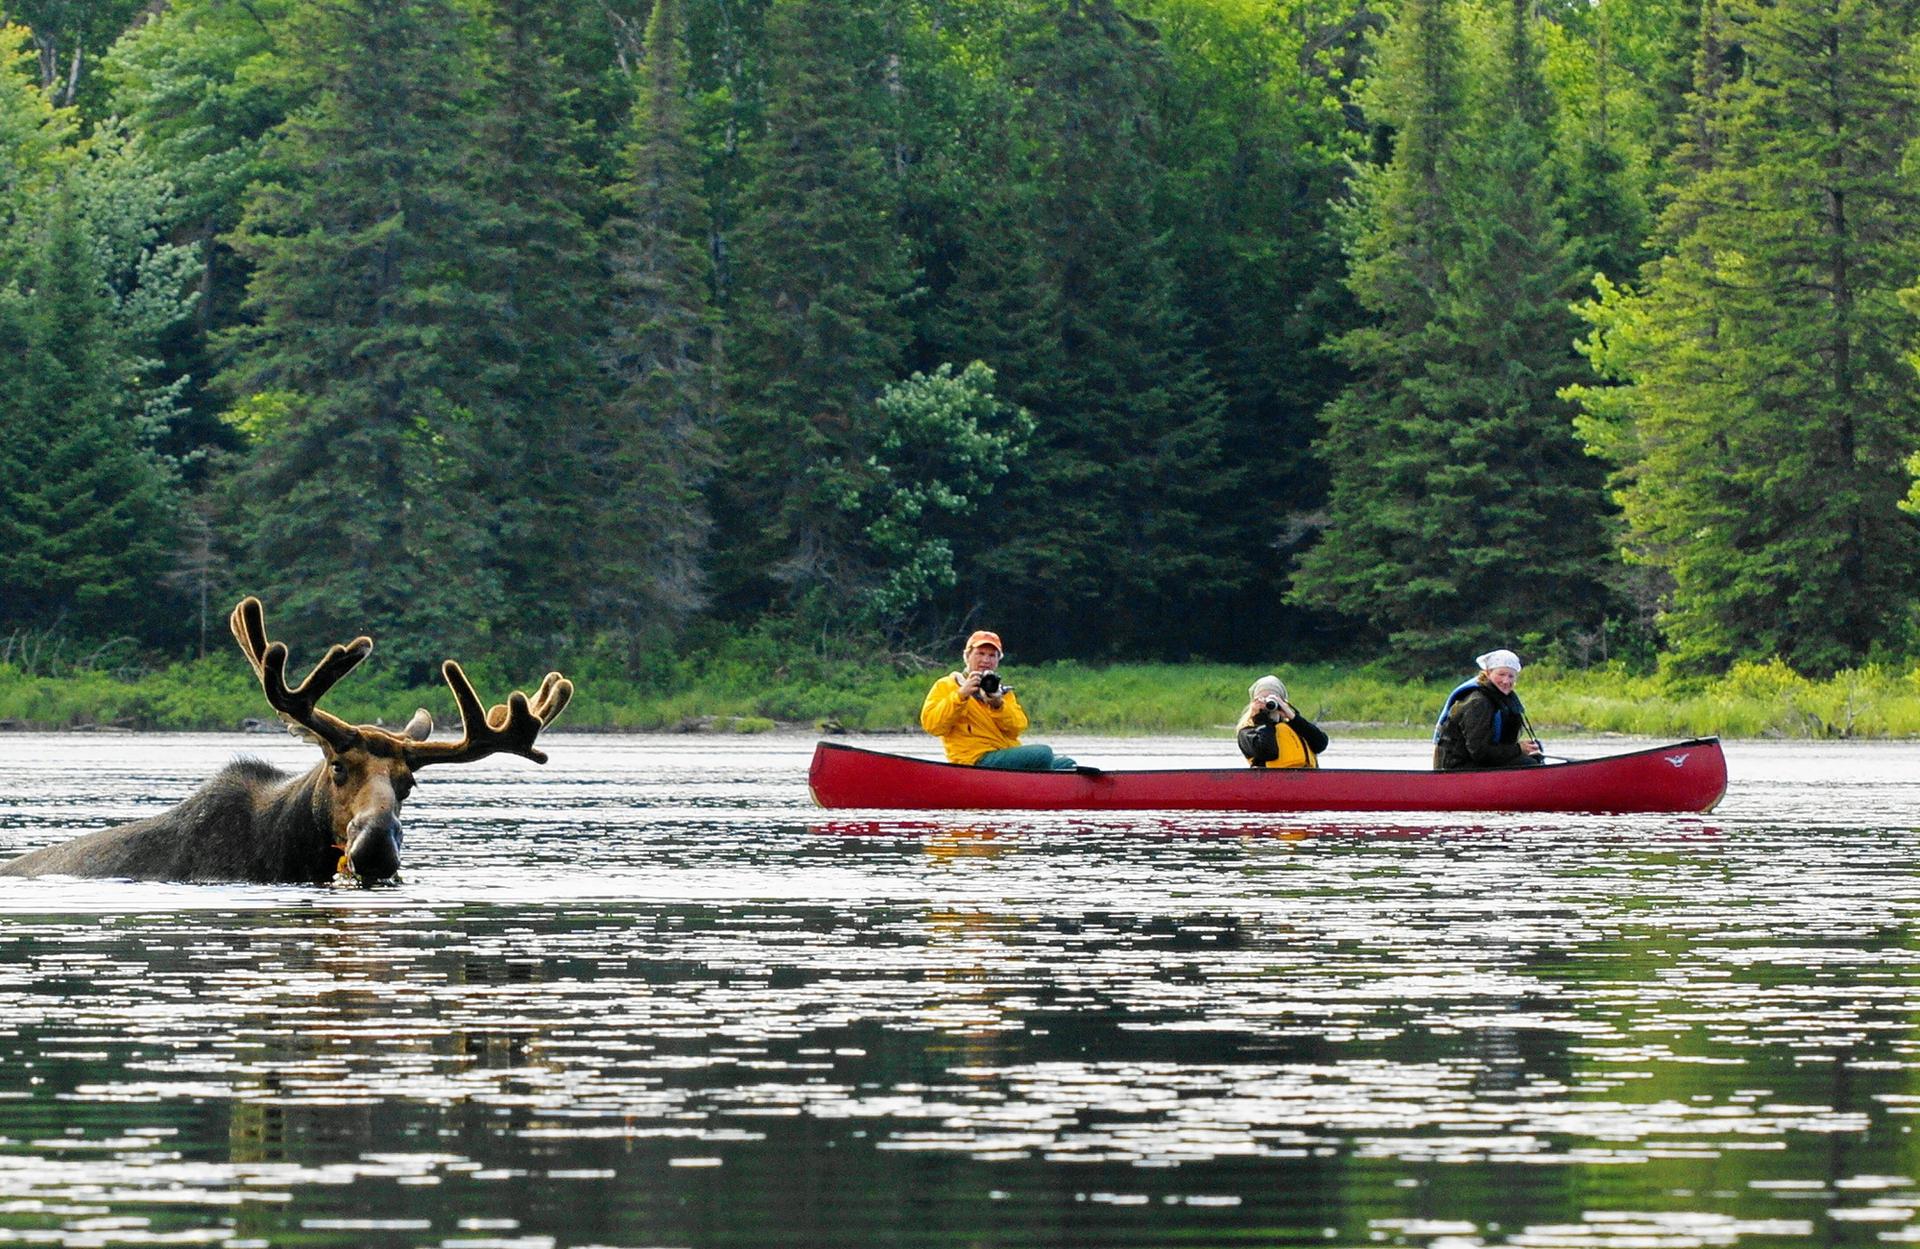 Why you need to visit Algonquin Park | Destination Canada